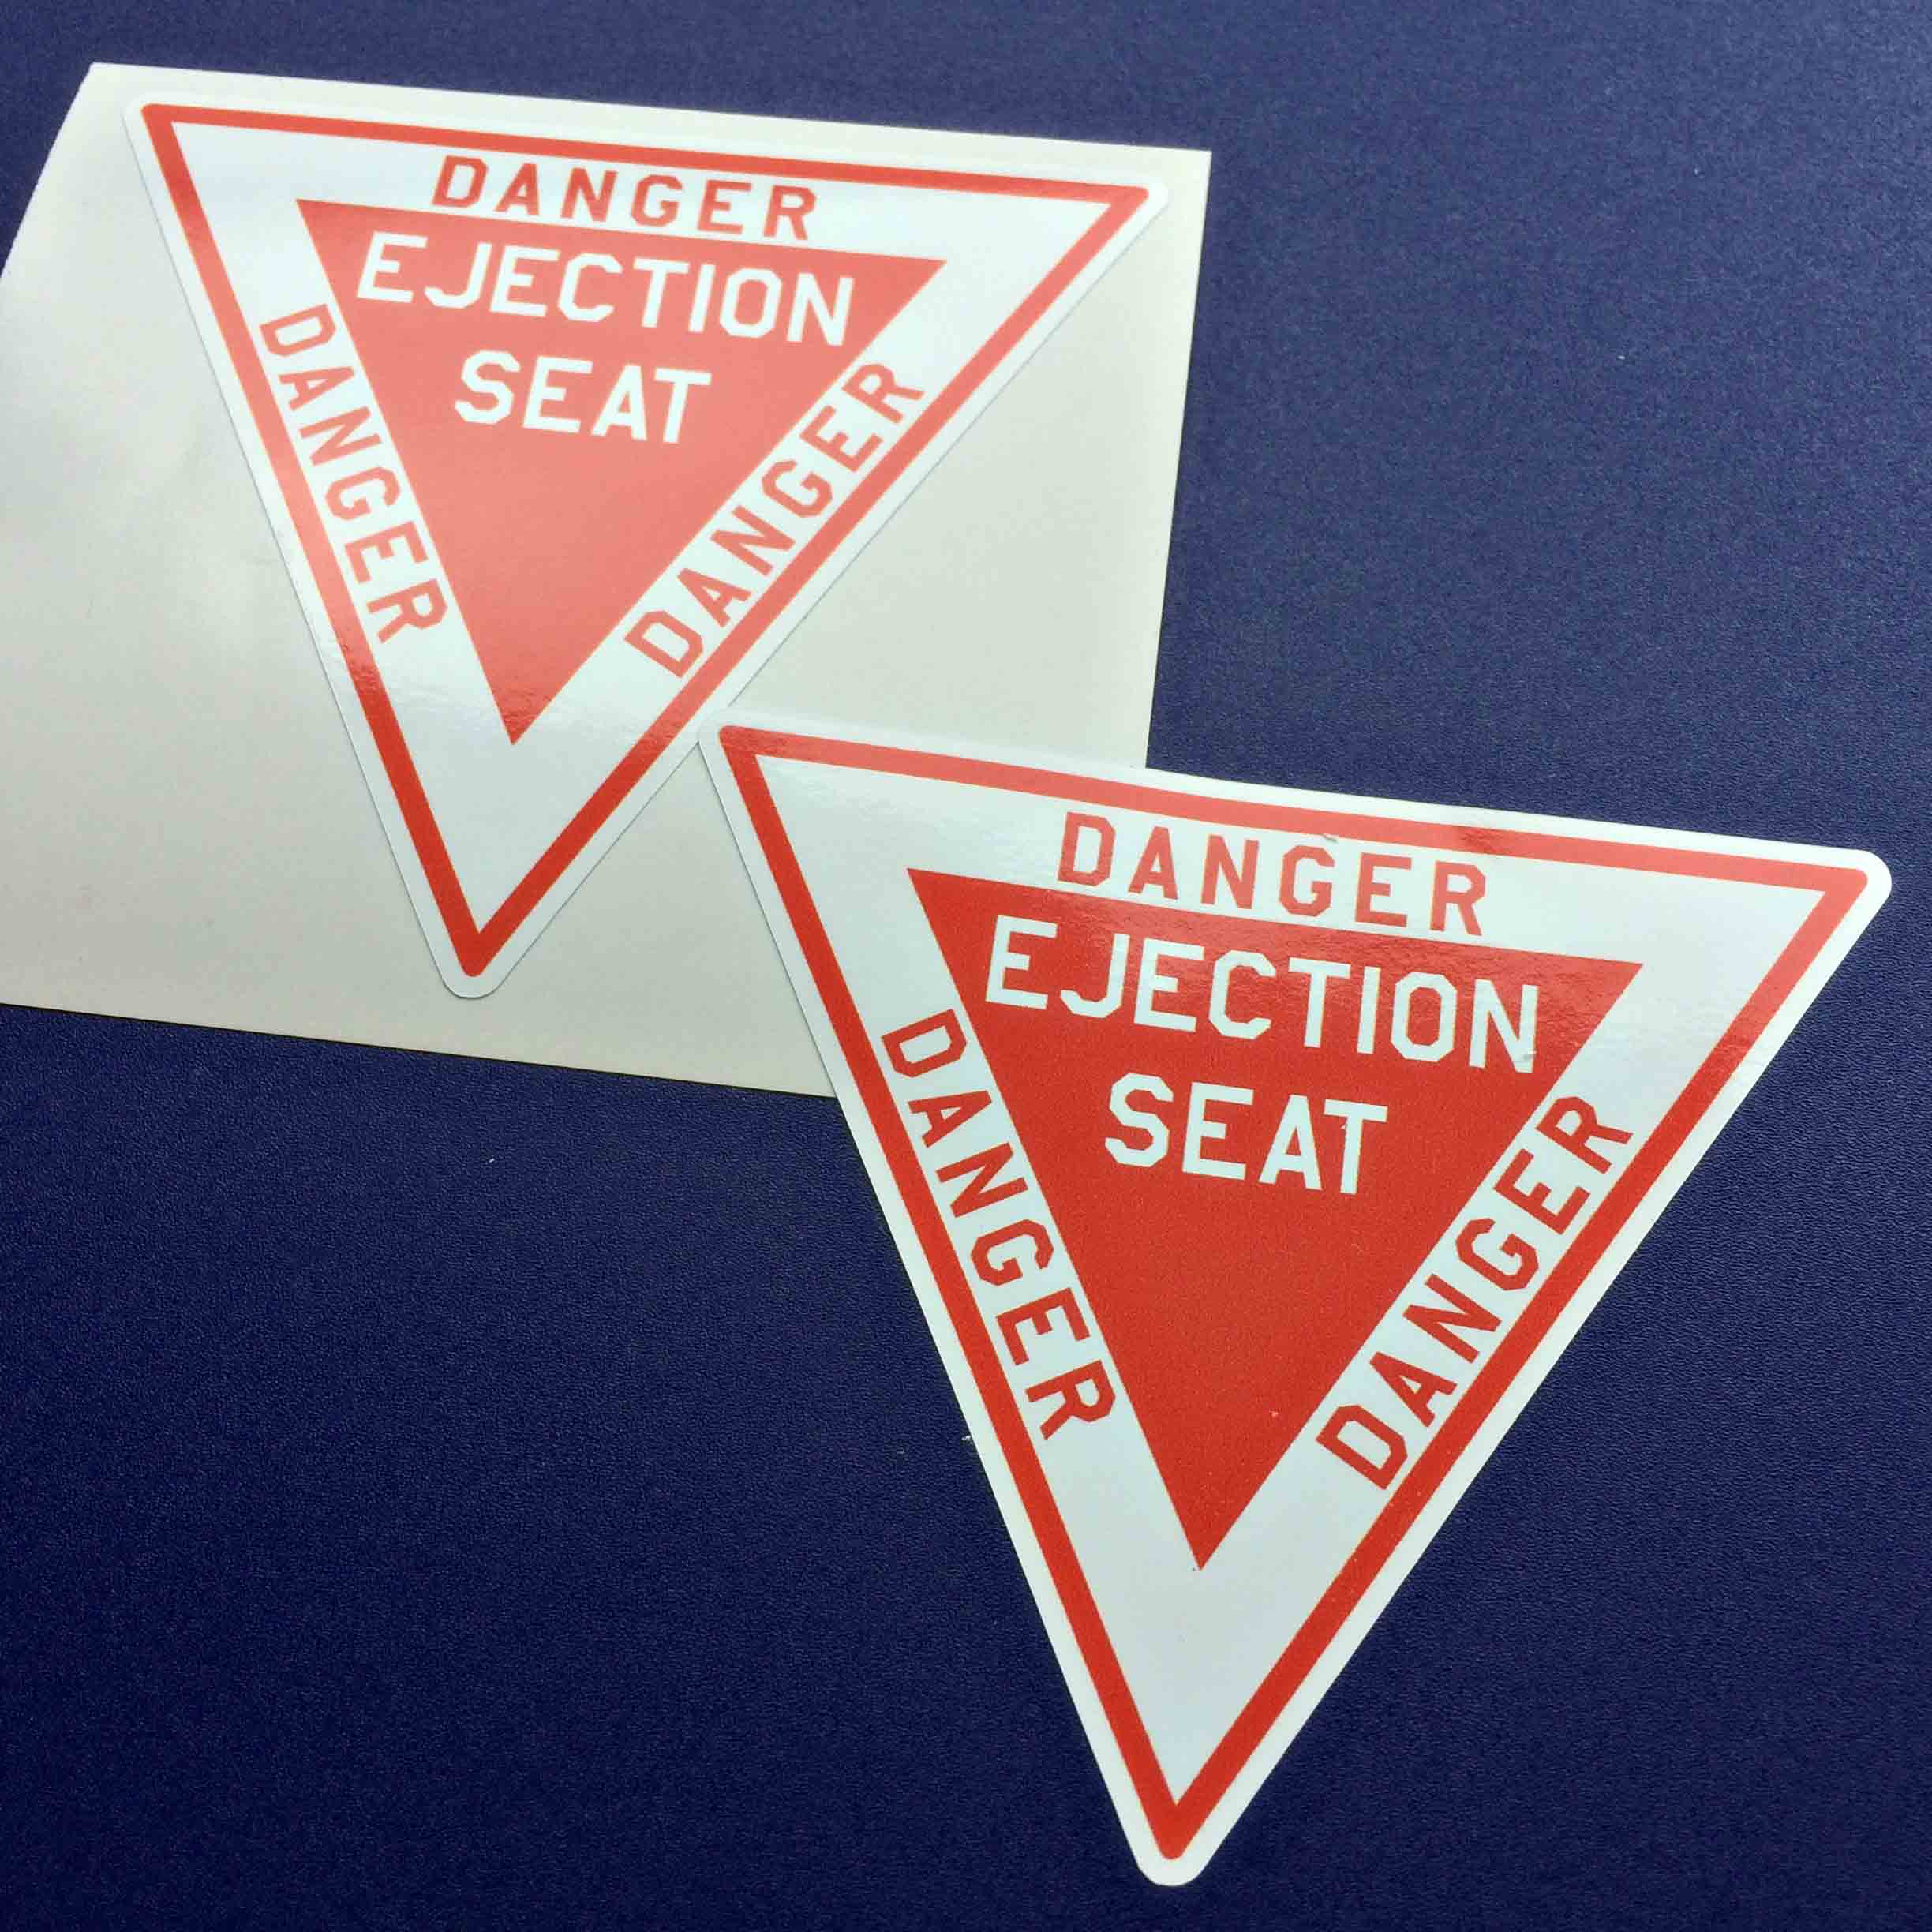 Danger in red lettering on three sides of an inverted white triangle with a red border. Inside on a smaller red triangle is Ejection Seat in white lettering.